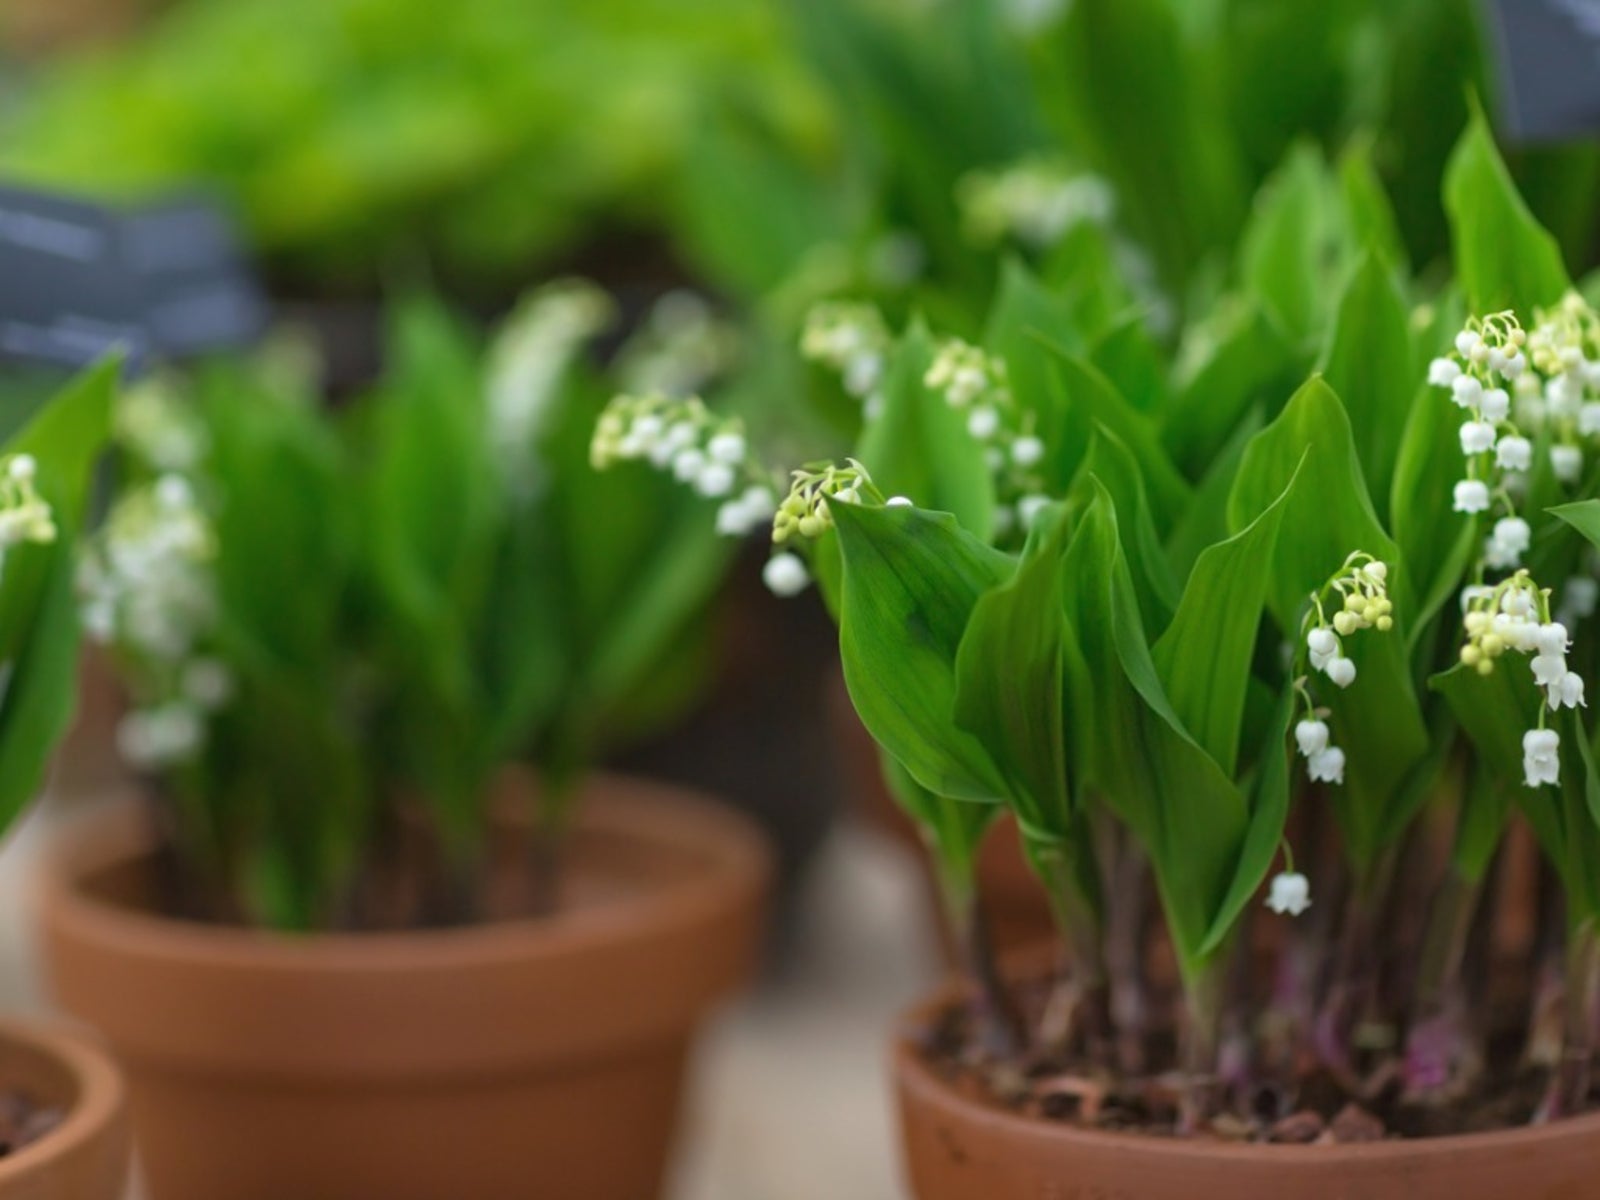 How to Grow Lily of the Valley: 5 Easy Steps